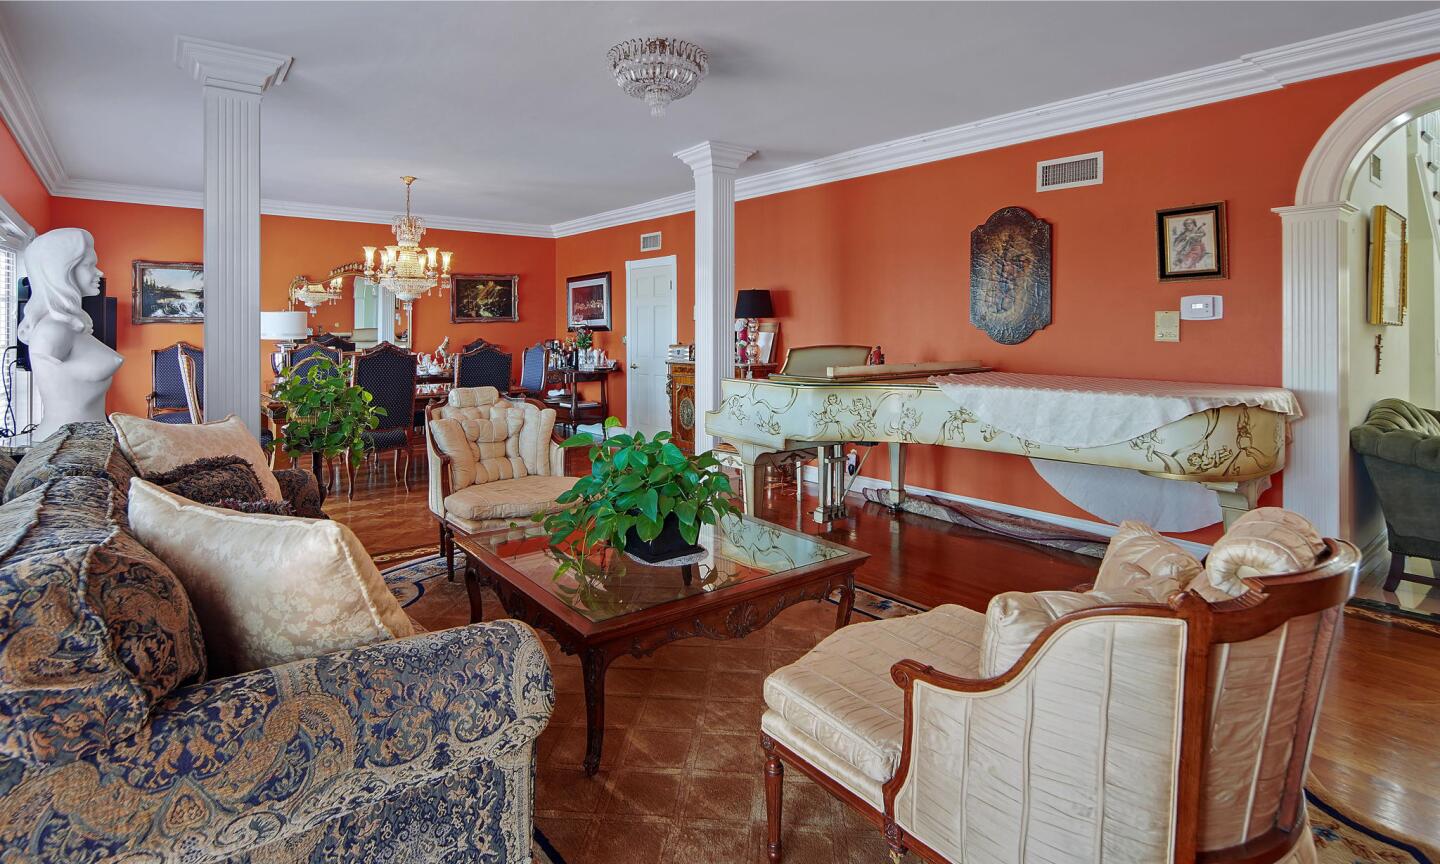 The living room is furnished and has orange walls and a white ceiling.